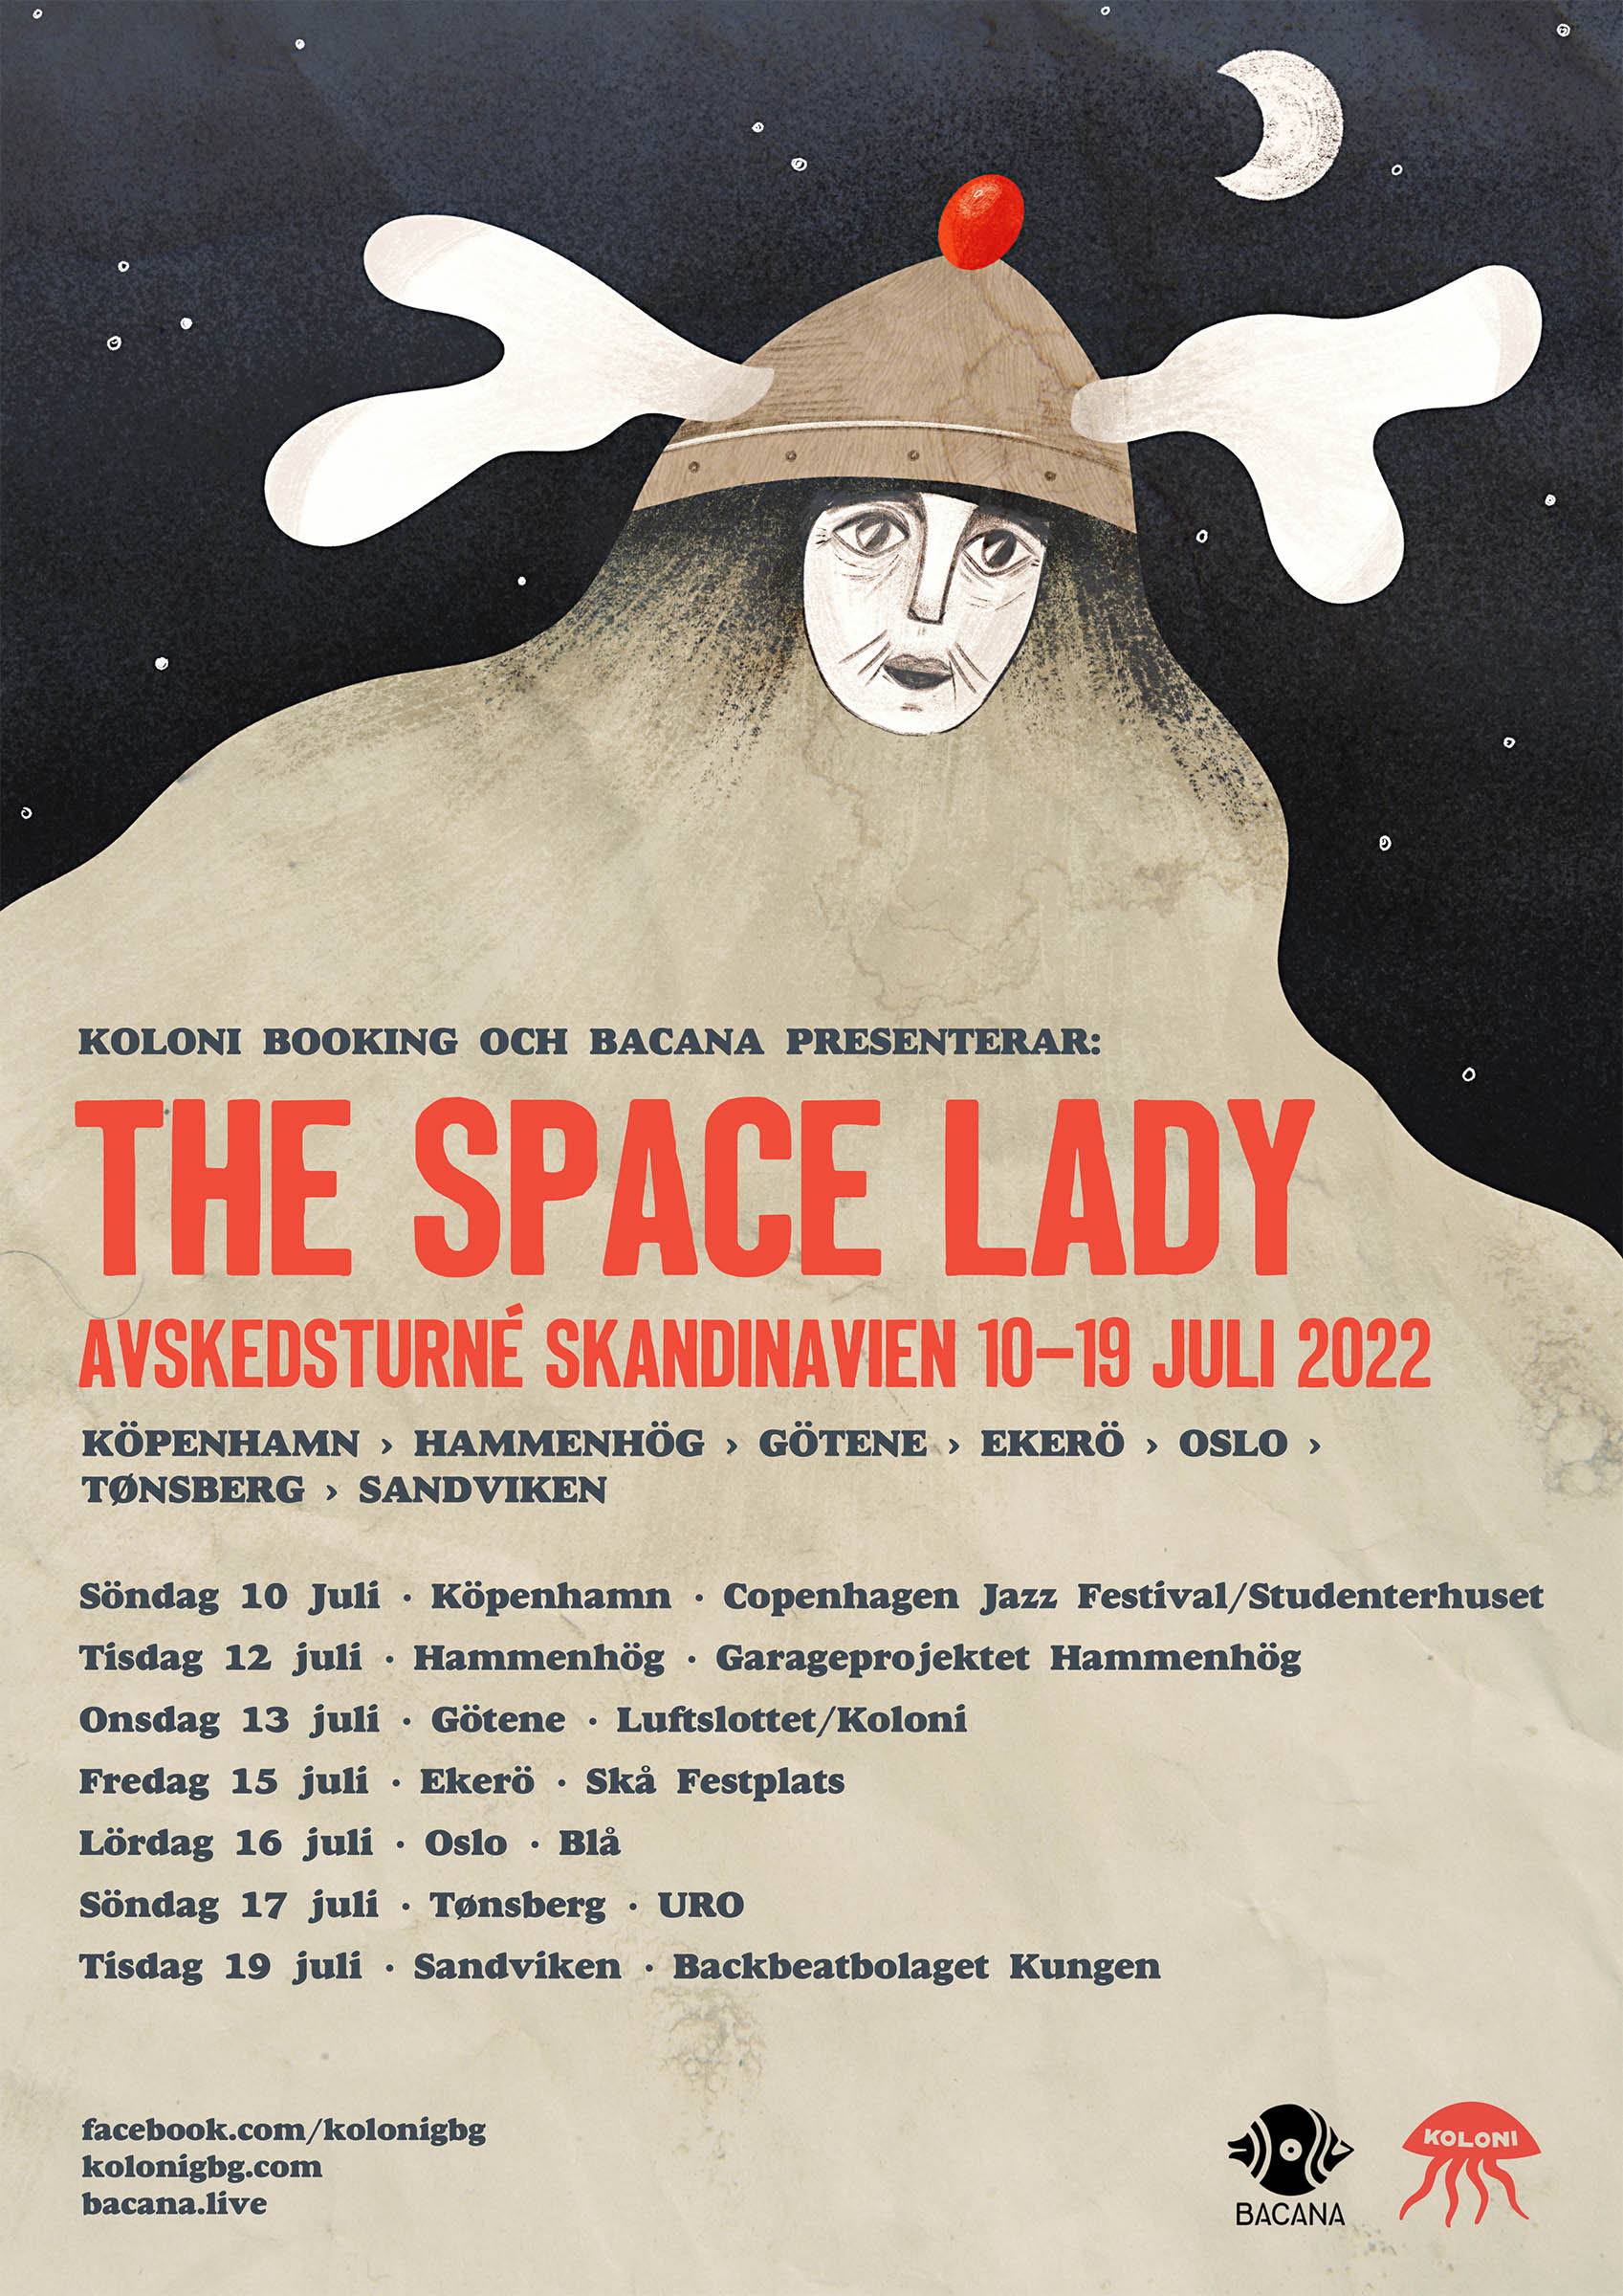 The space lady with a hat with antlers and a dark sky with moon and stars in the background.